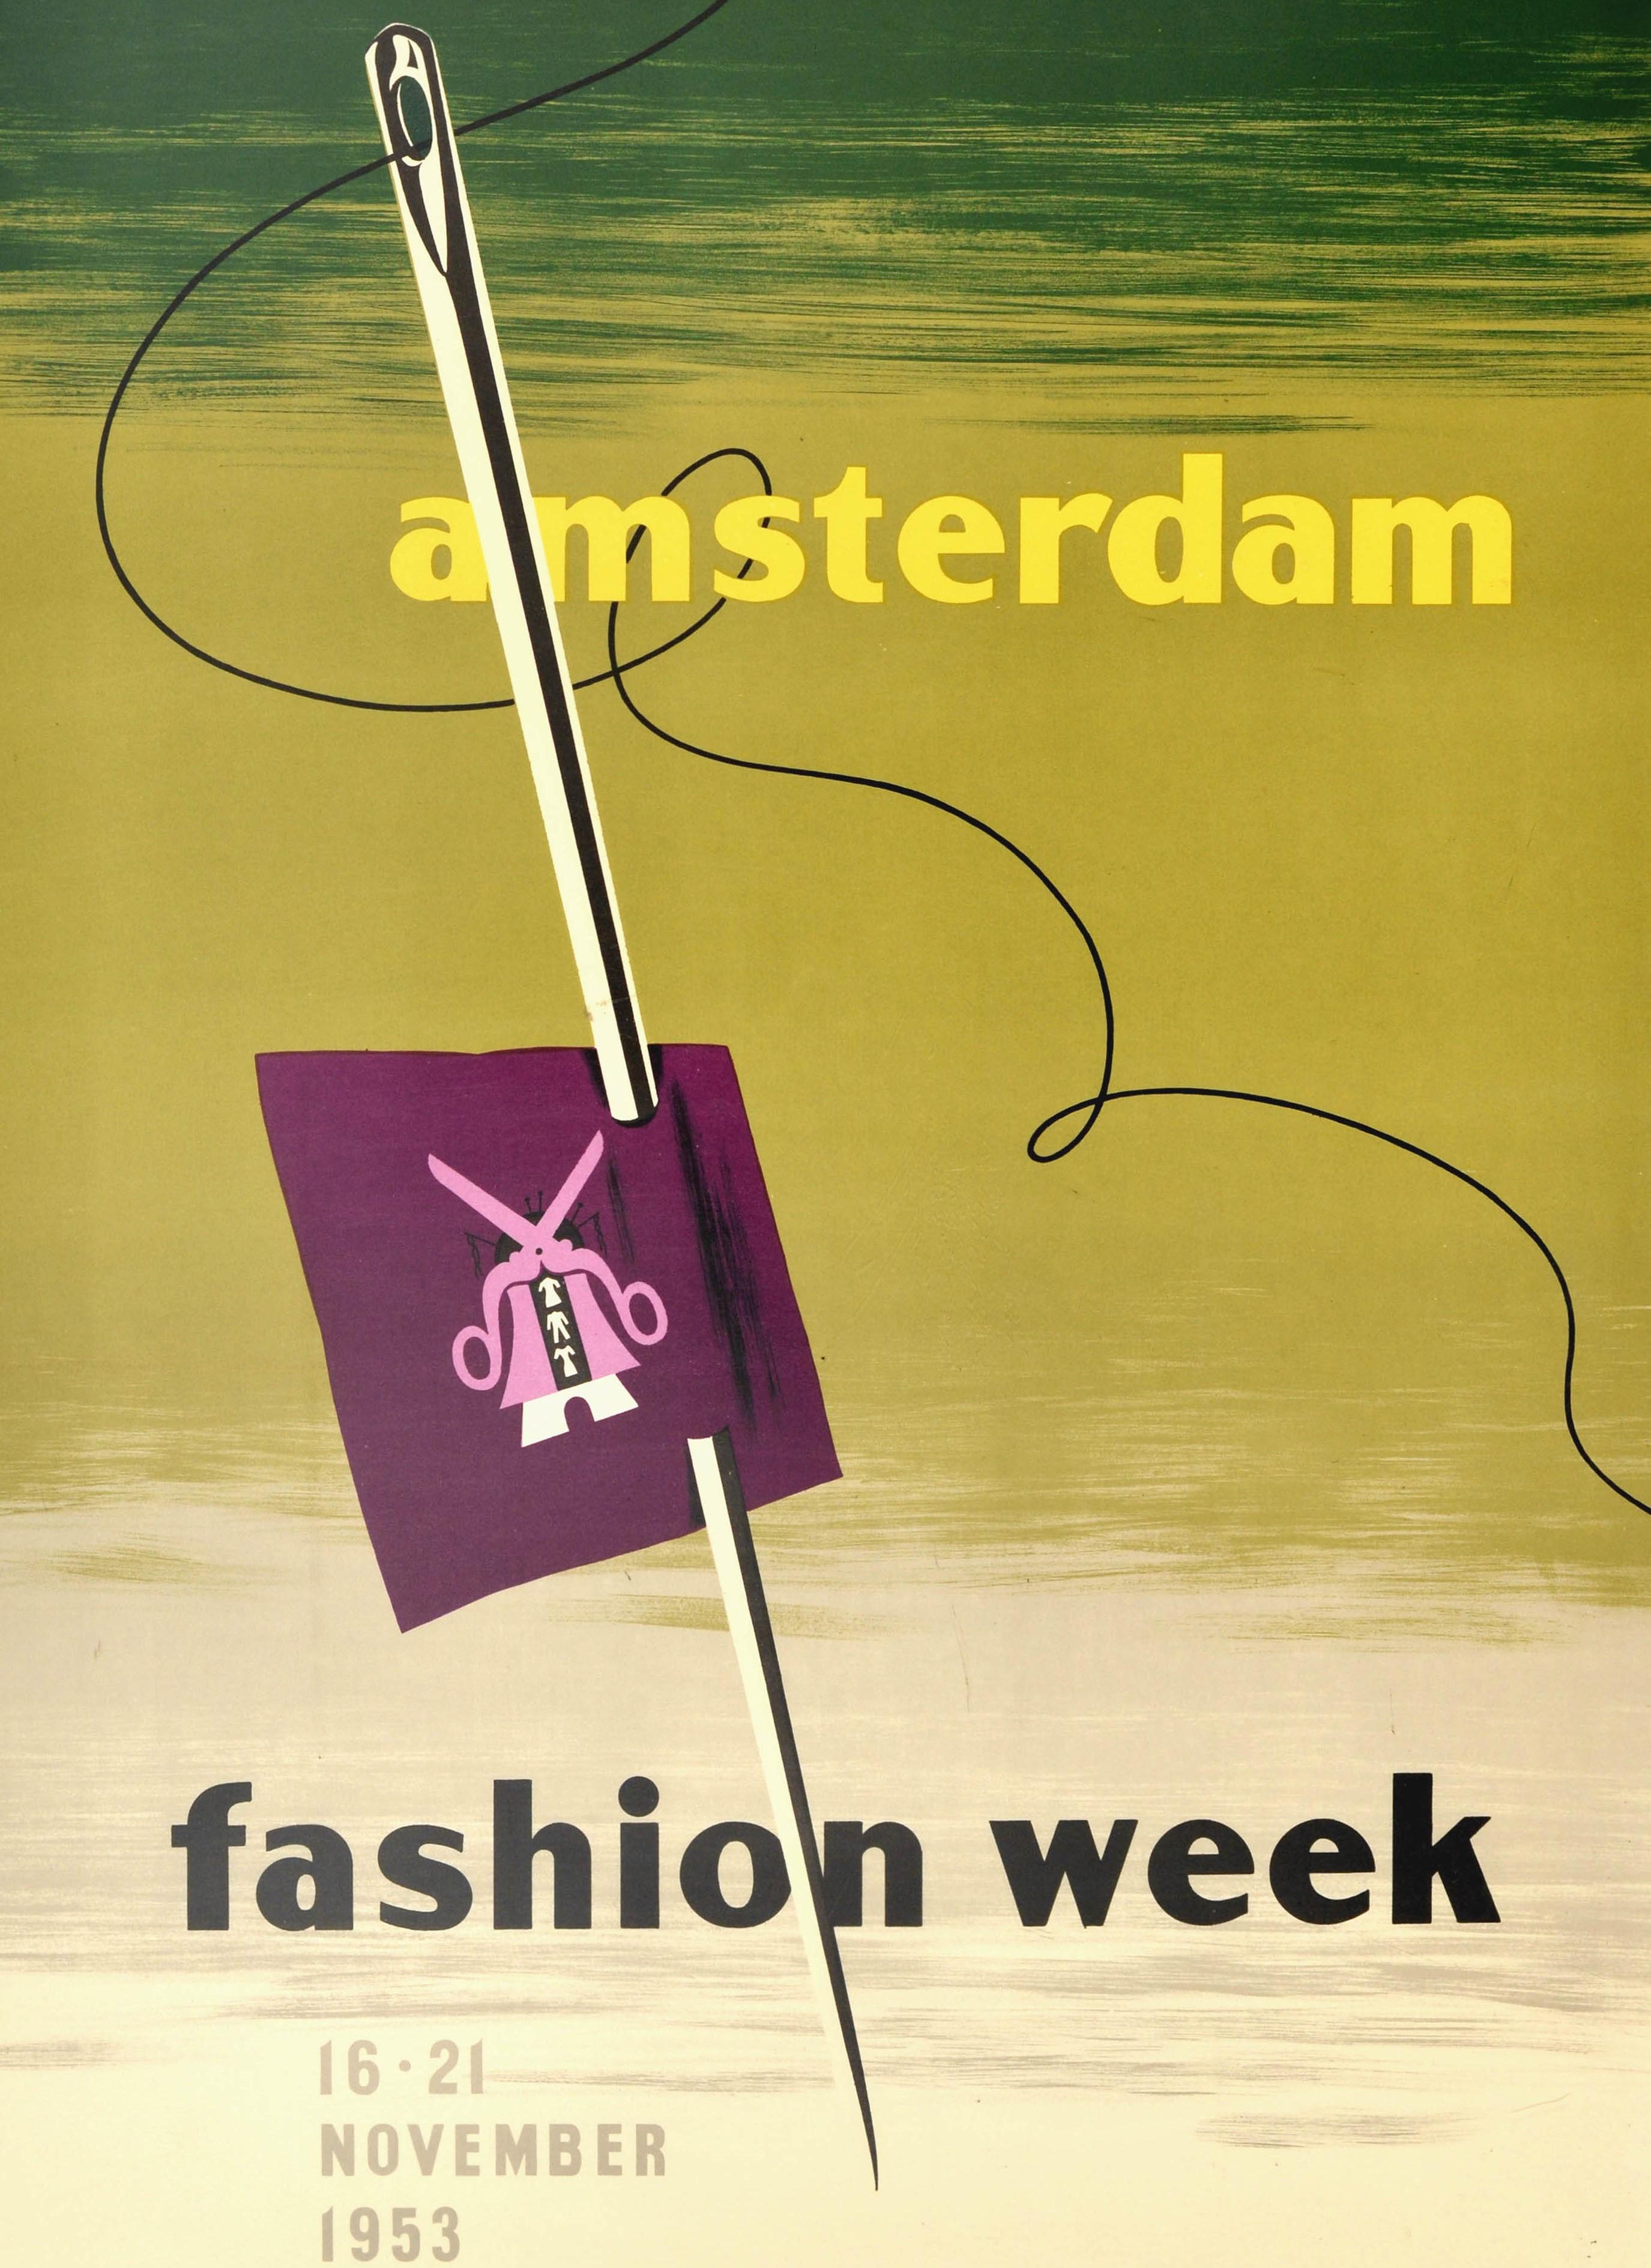 Original vintage advertising poster for the Amsterdam Fashion Week 16-21 November 1953 featuring a great mid-century design of a pair of scissors and images of clothing styles on a purple cloth pierced by a sewing needle diagonally in the centre